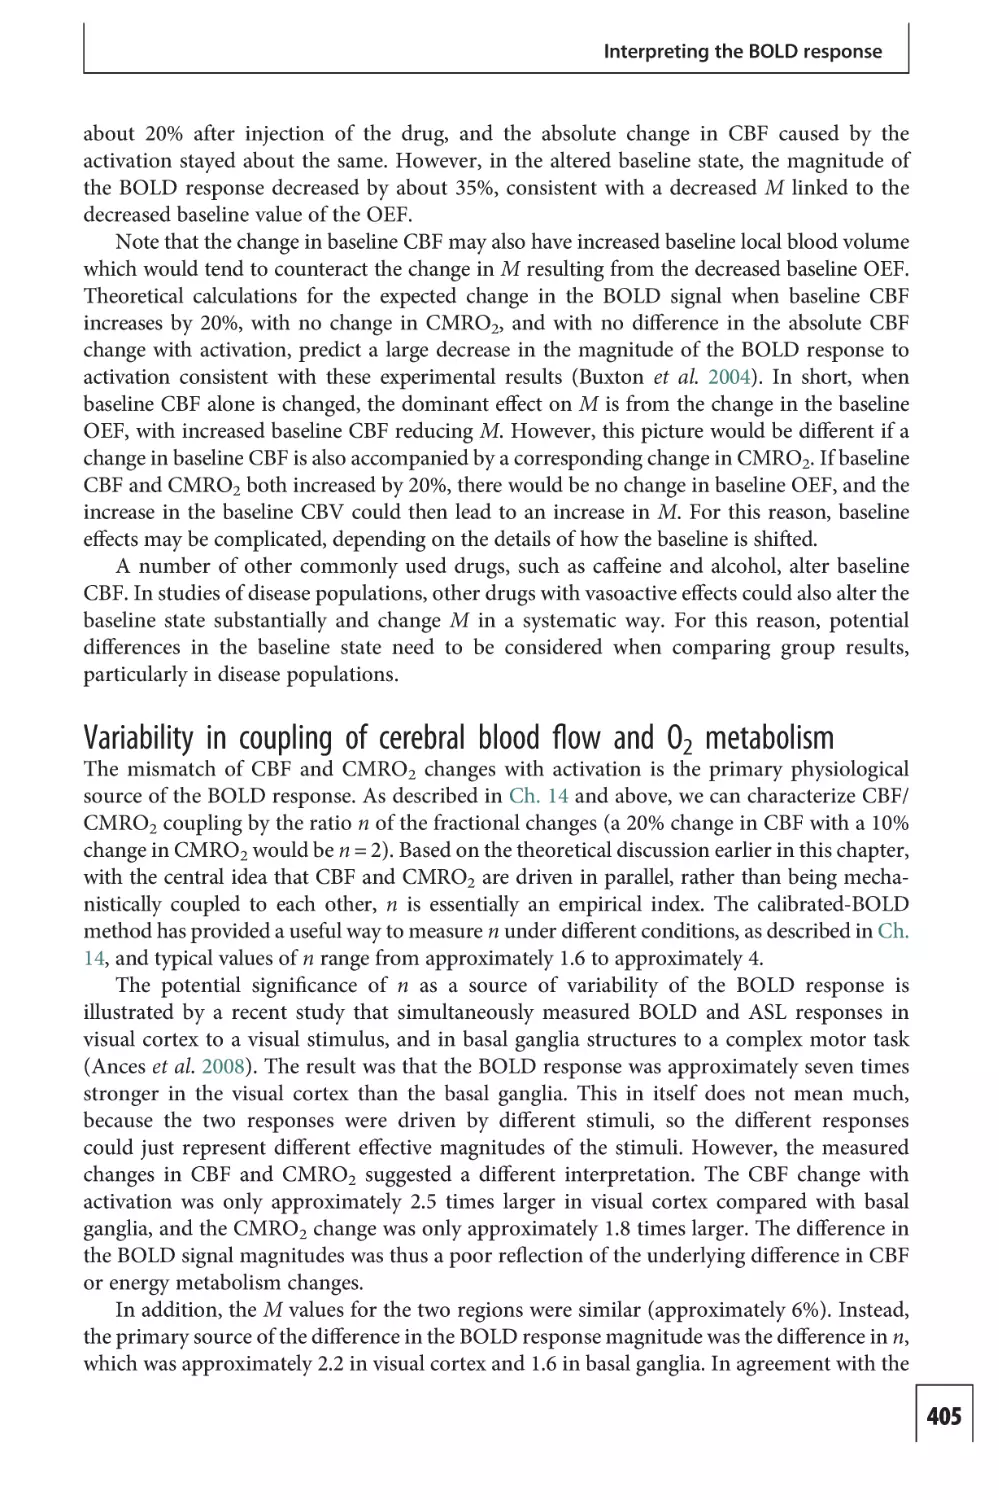 Variability in coupling of cerebral blood flow and O2 metabolism